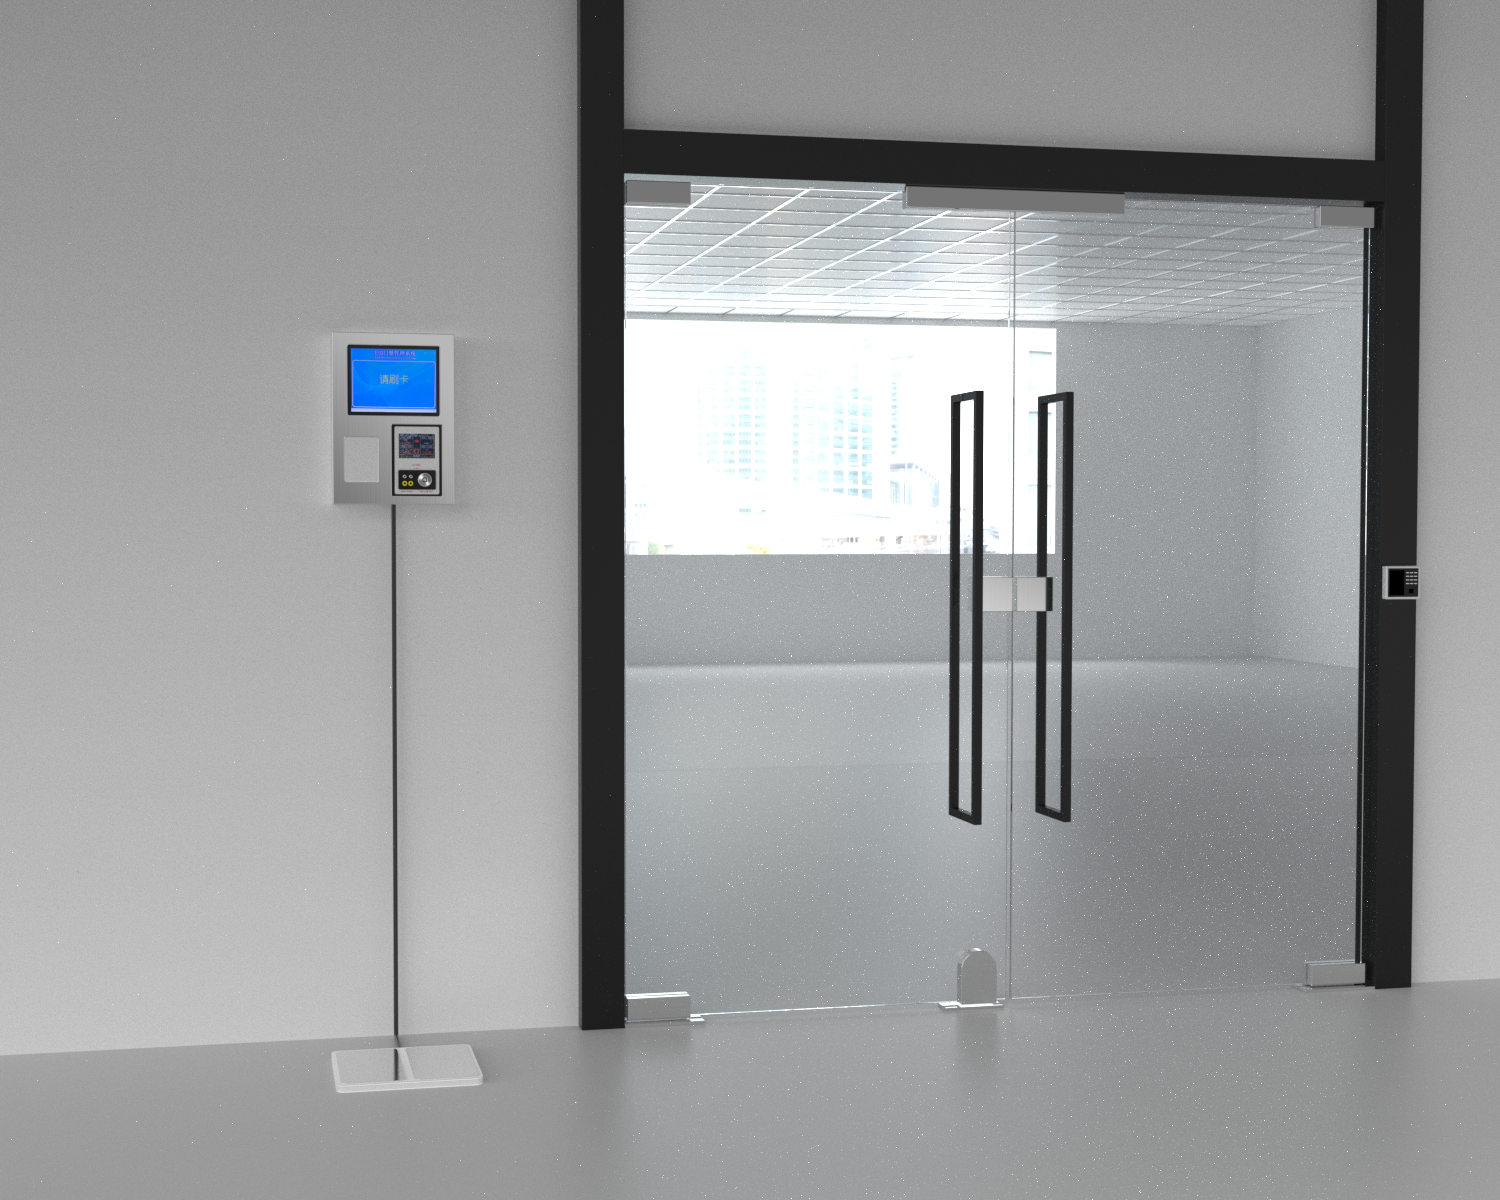 What are the advantages of ESD anti-static access control system